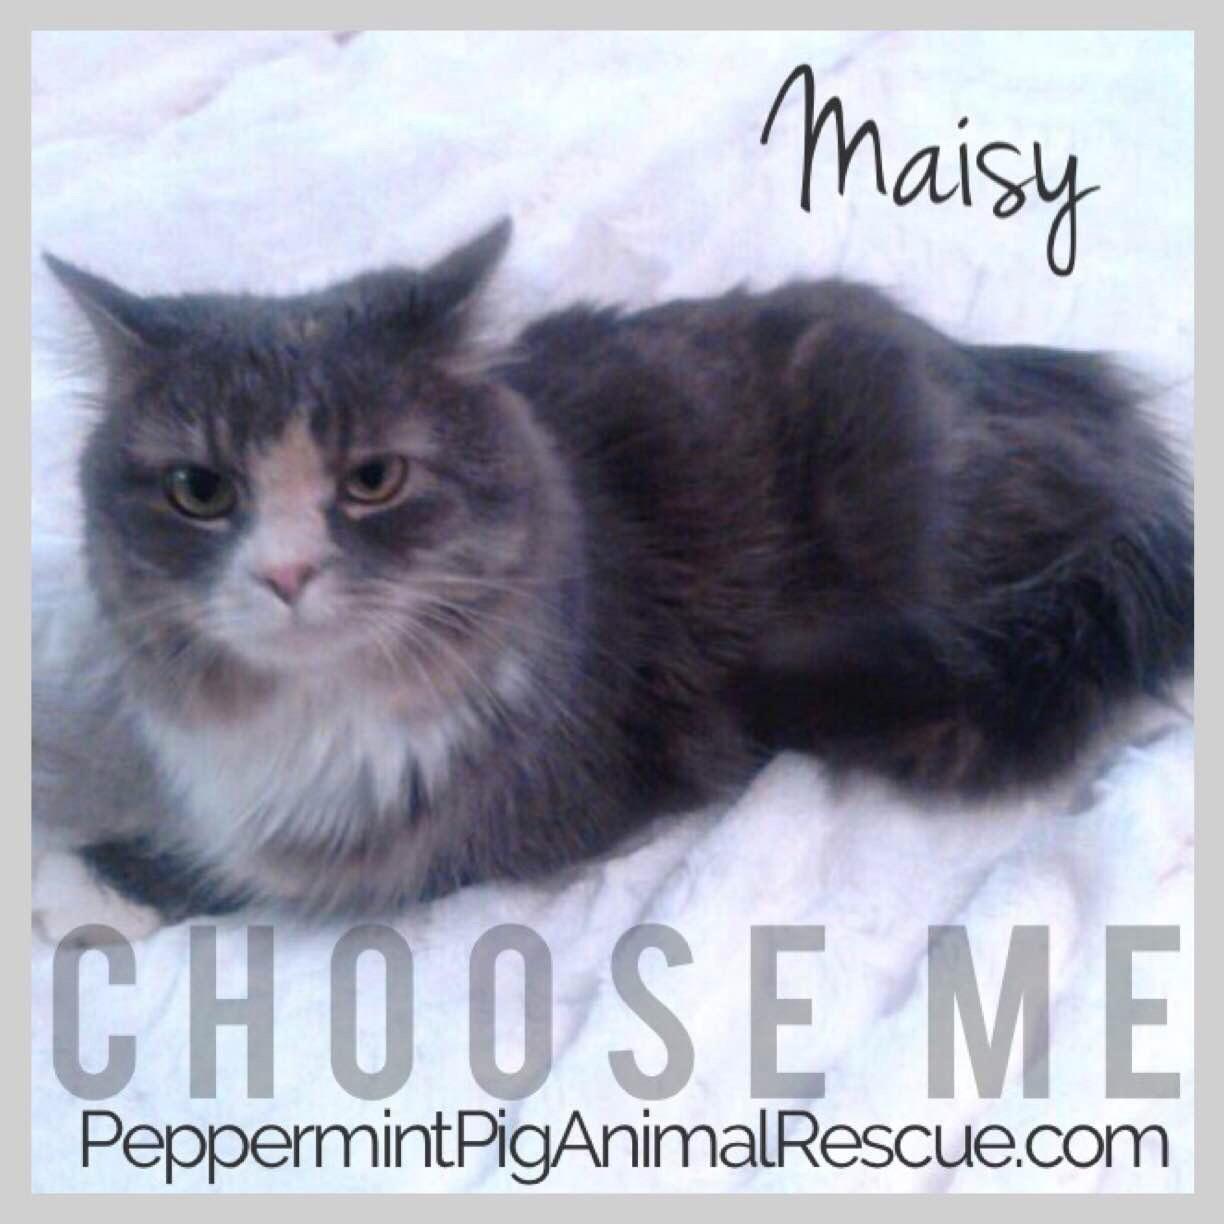 Maisy detail page